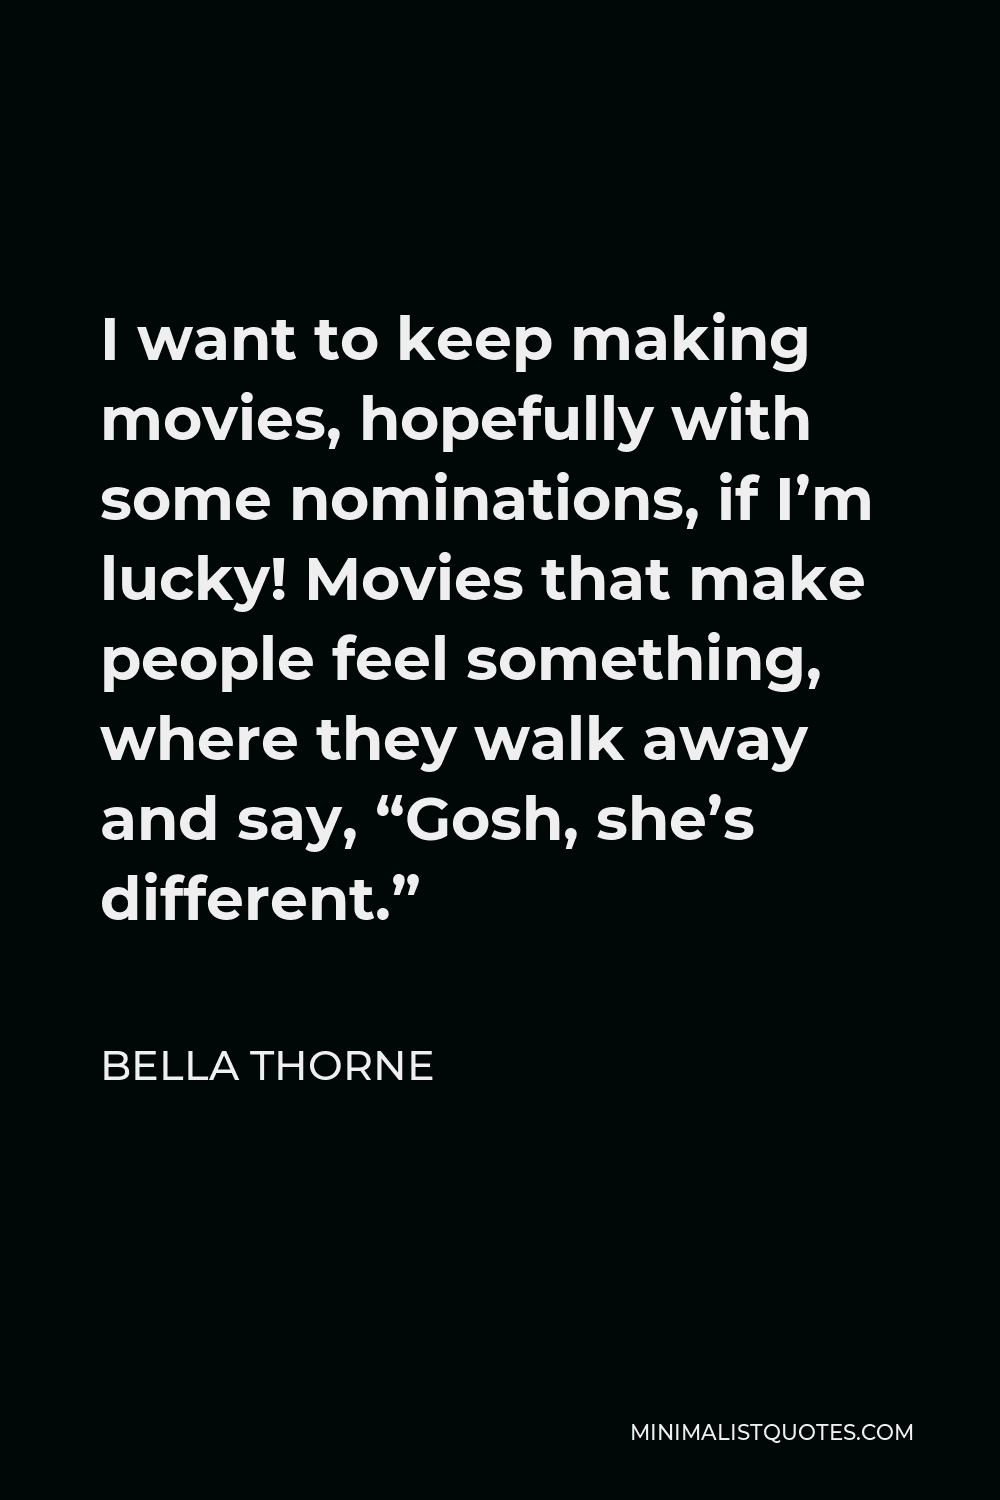 Bella Thorne Quote - I want to keep making movies, hopefully with some nominations, if I’m lucky! Movies that make people feel something, where they walk away and say, “Gosh, she’s different.”